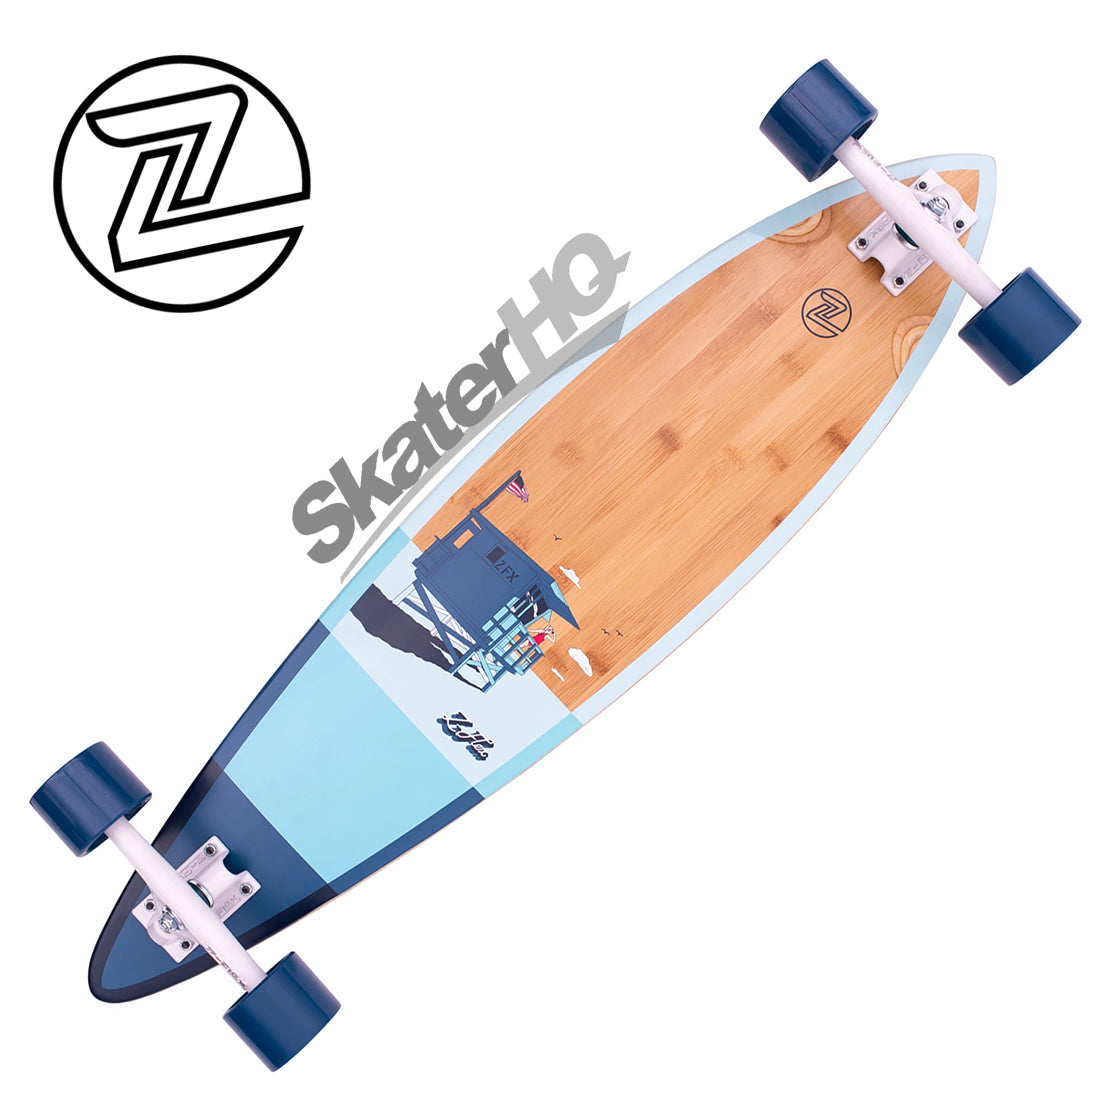 Z-Flex Bamboo 38 Pintail Complete - Baywatch Skateboard Completes Longboards